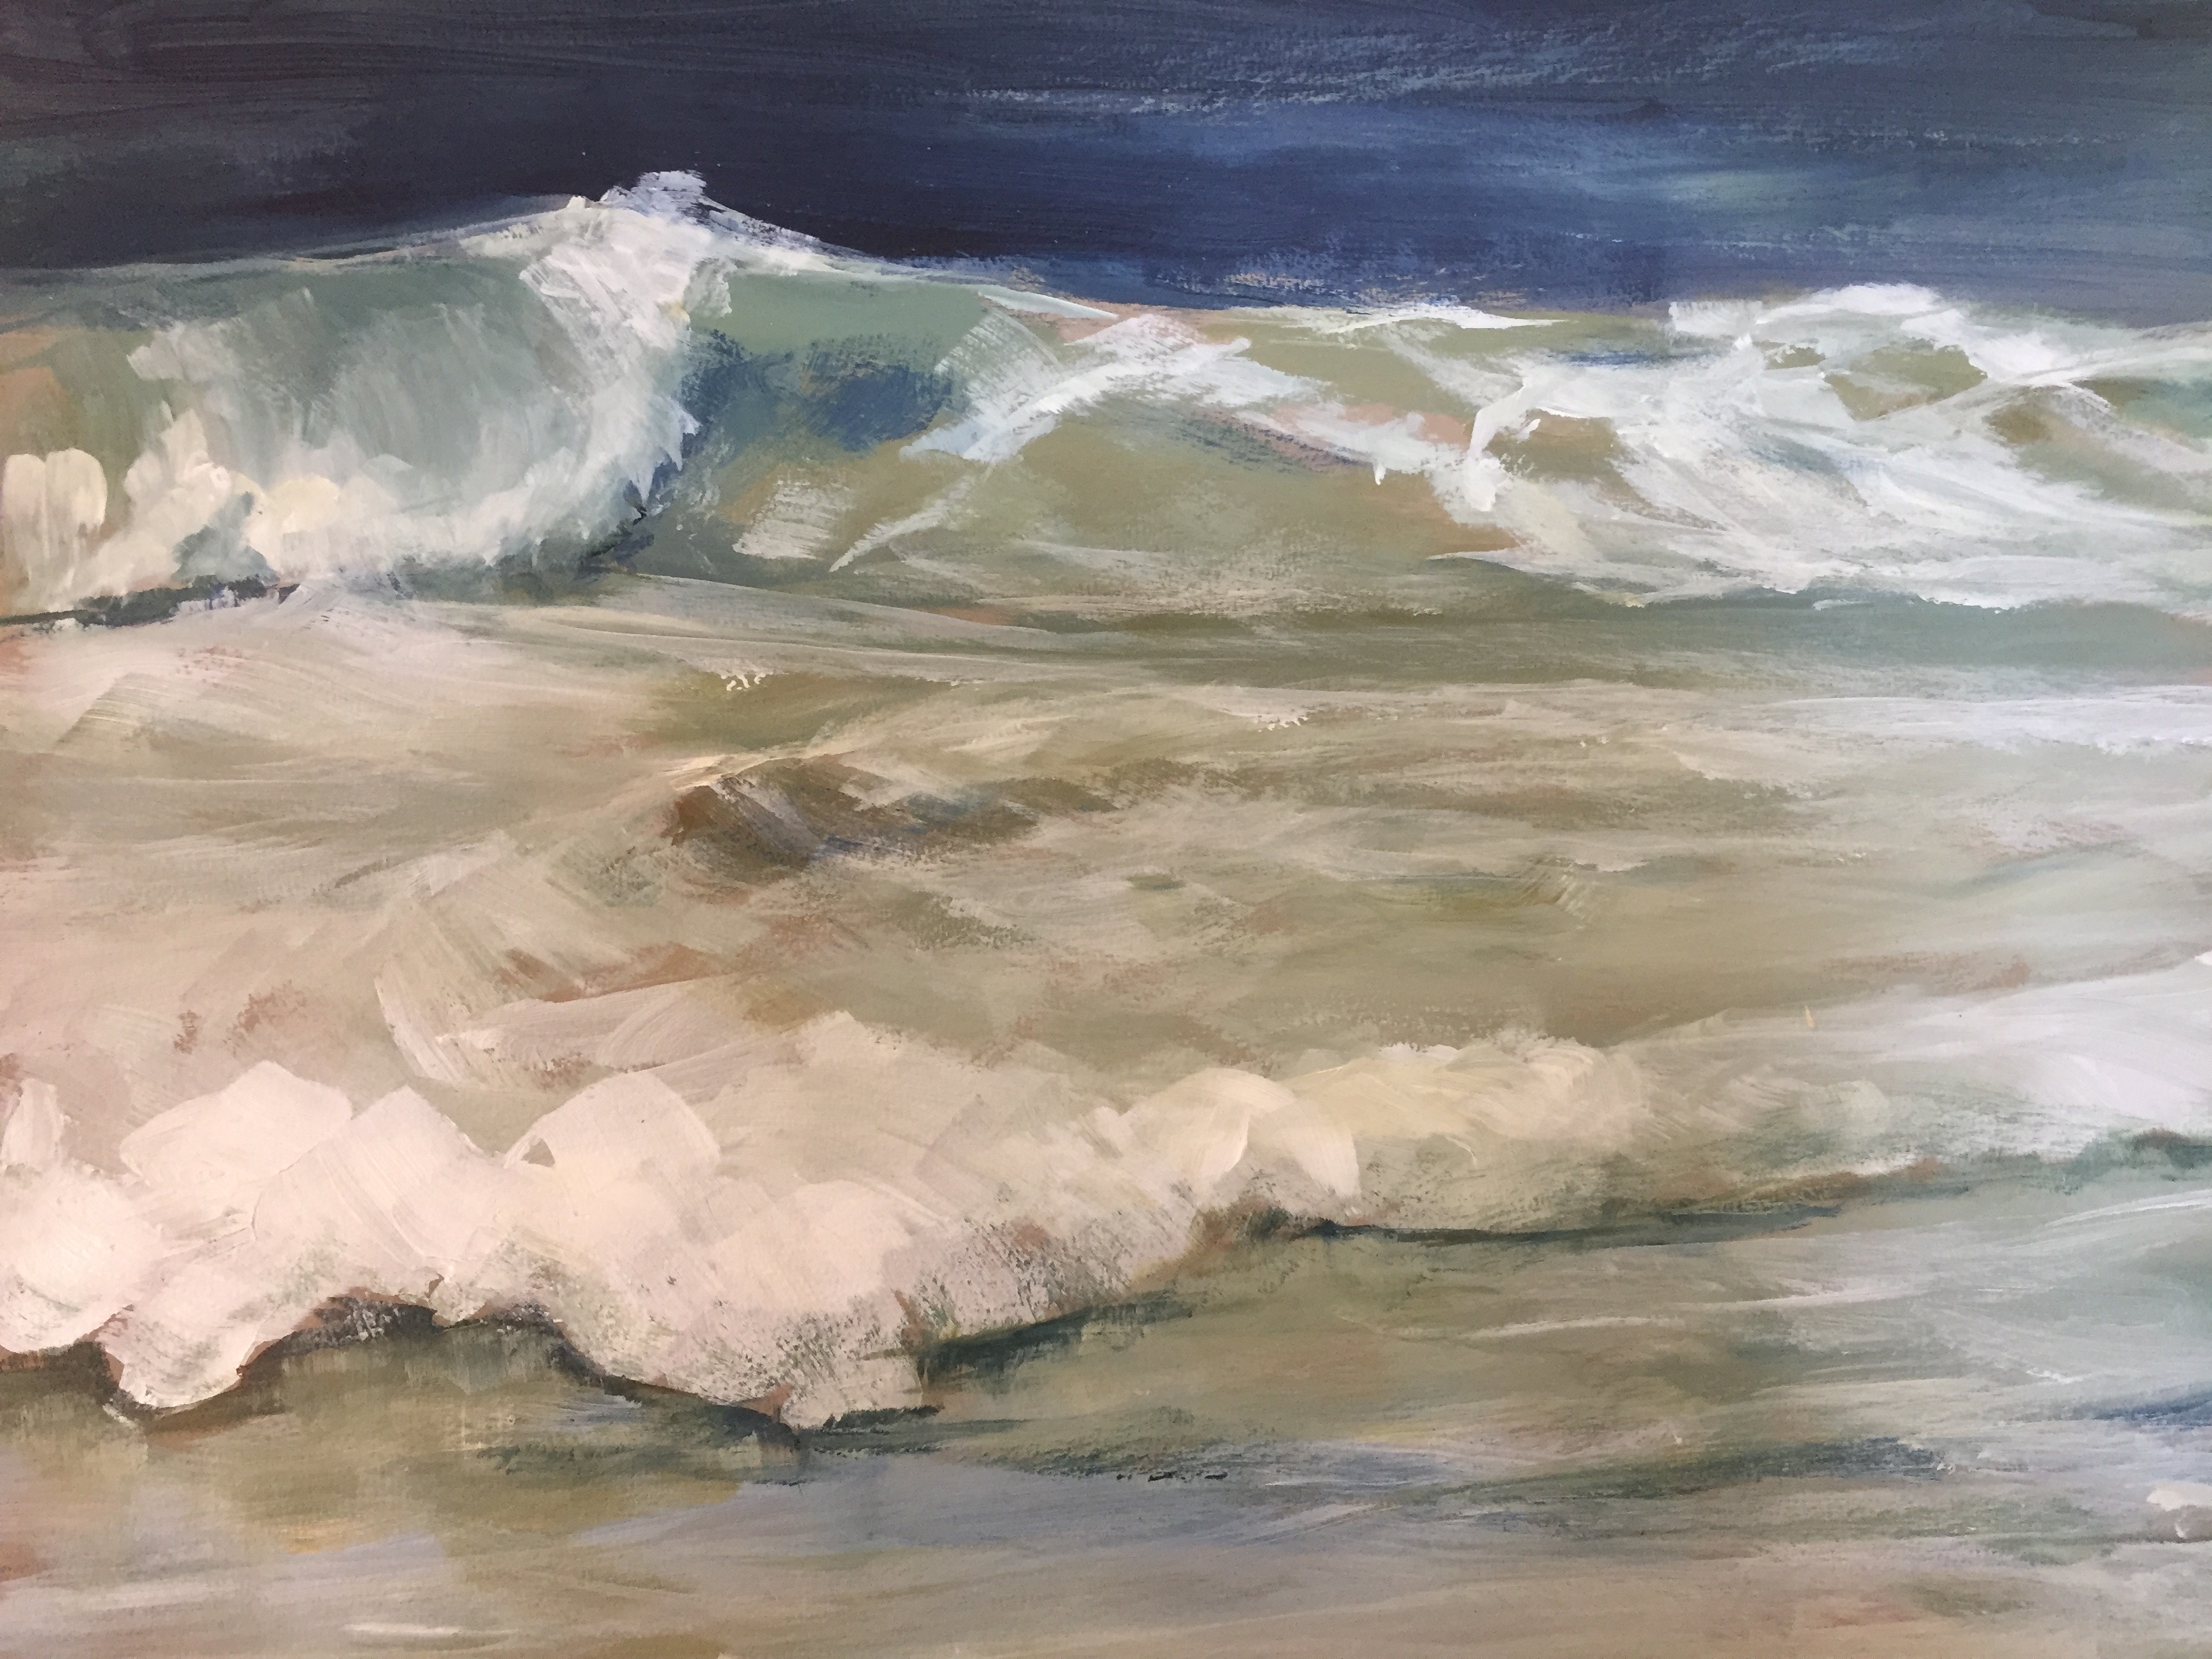 How to paint waves